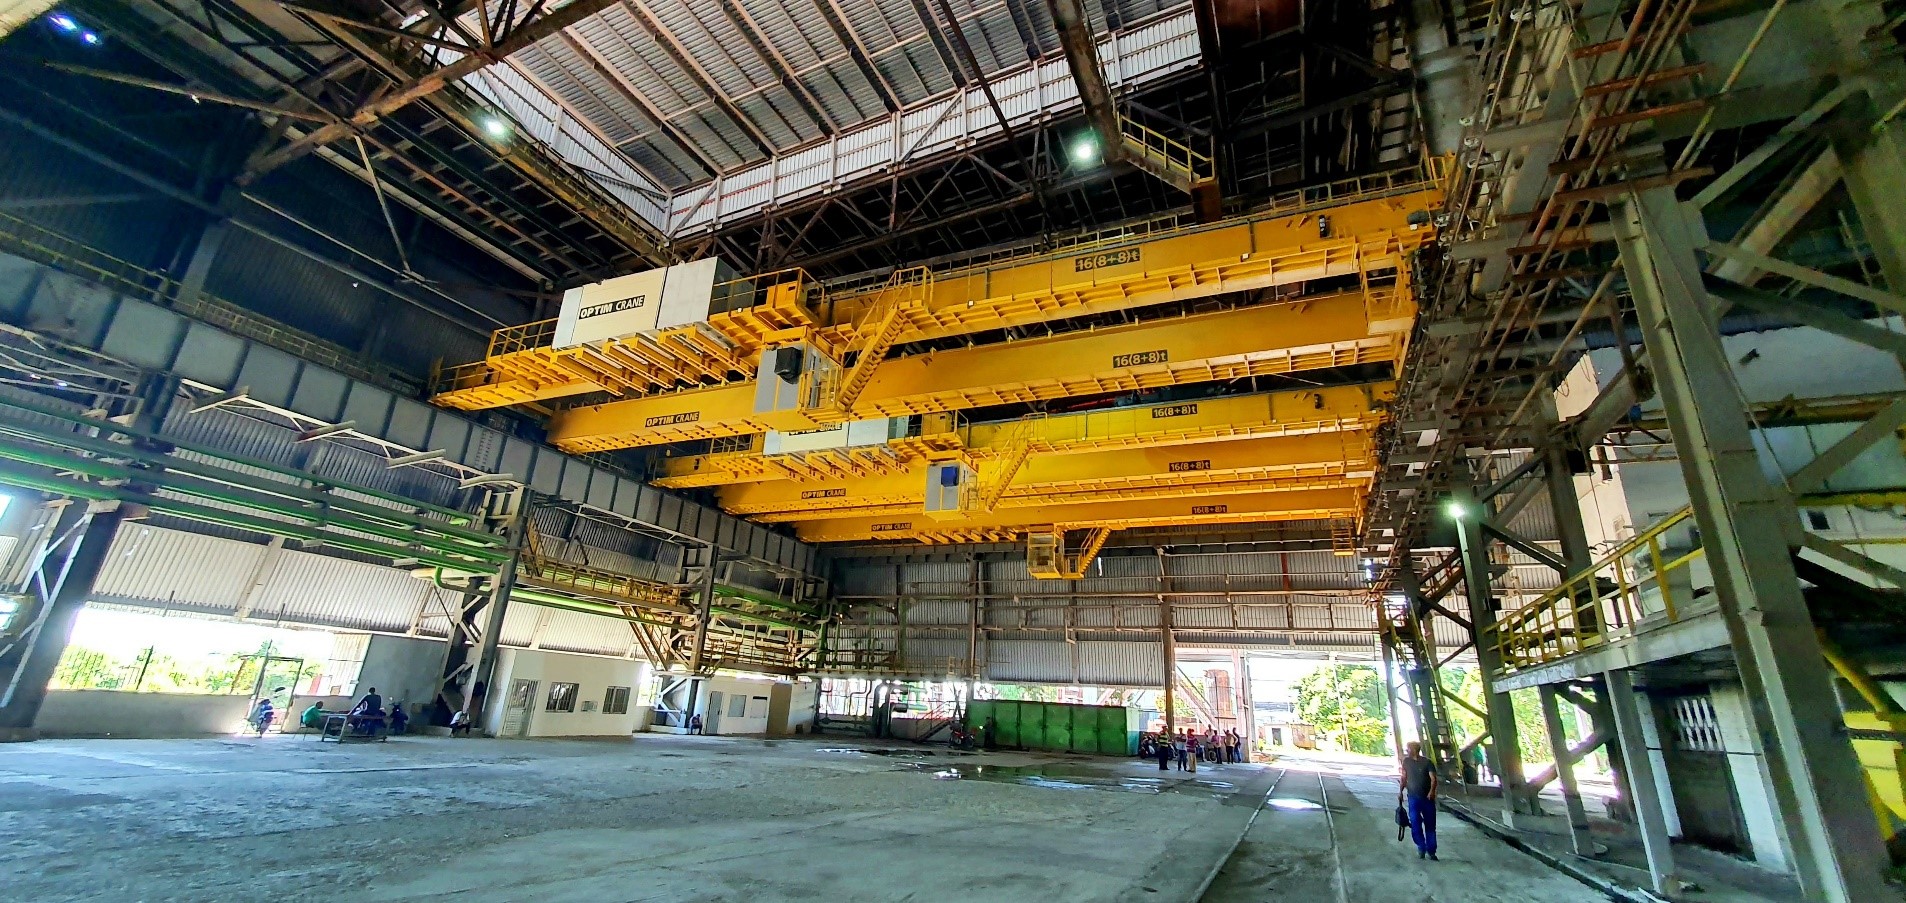 6 cranes manufactured by our company have been put into operation for a large metallurgical enterprise in Latin America.